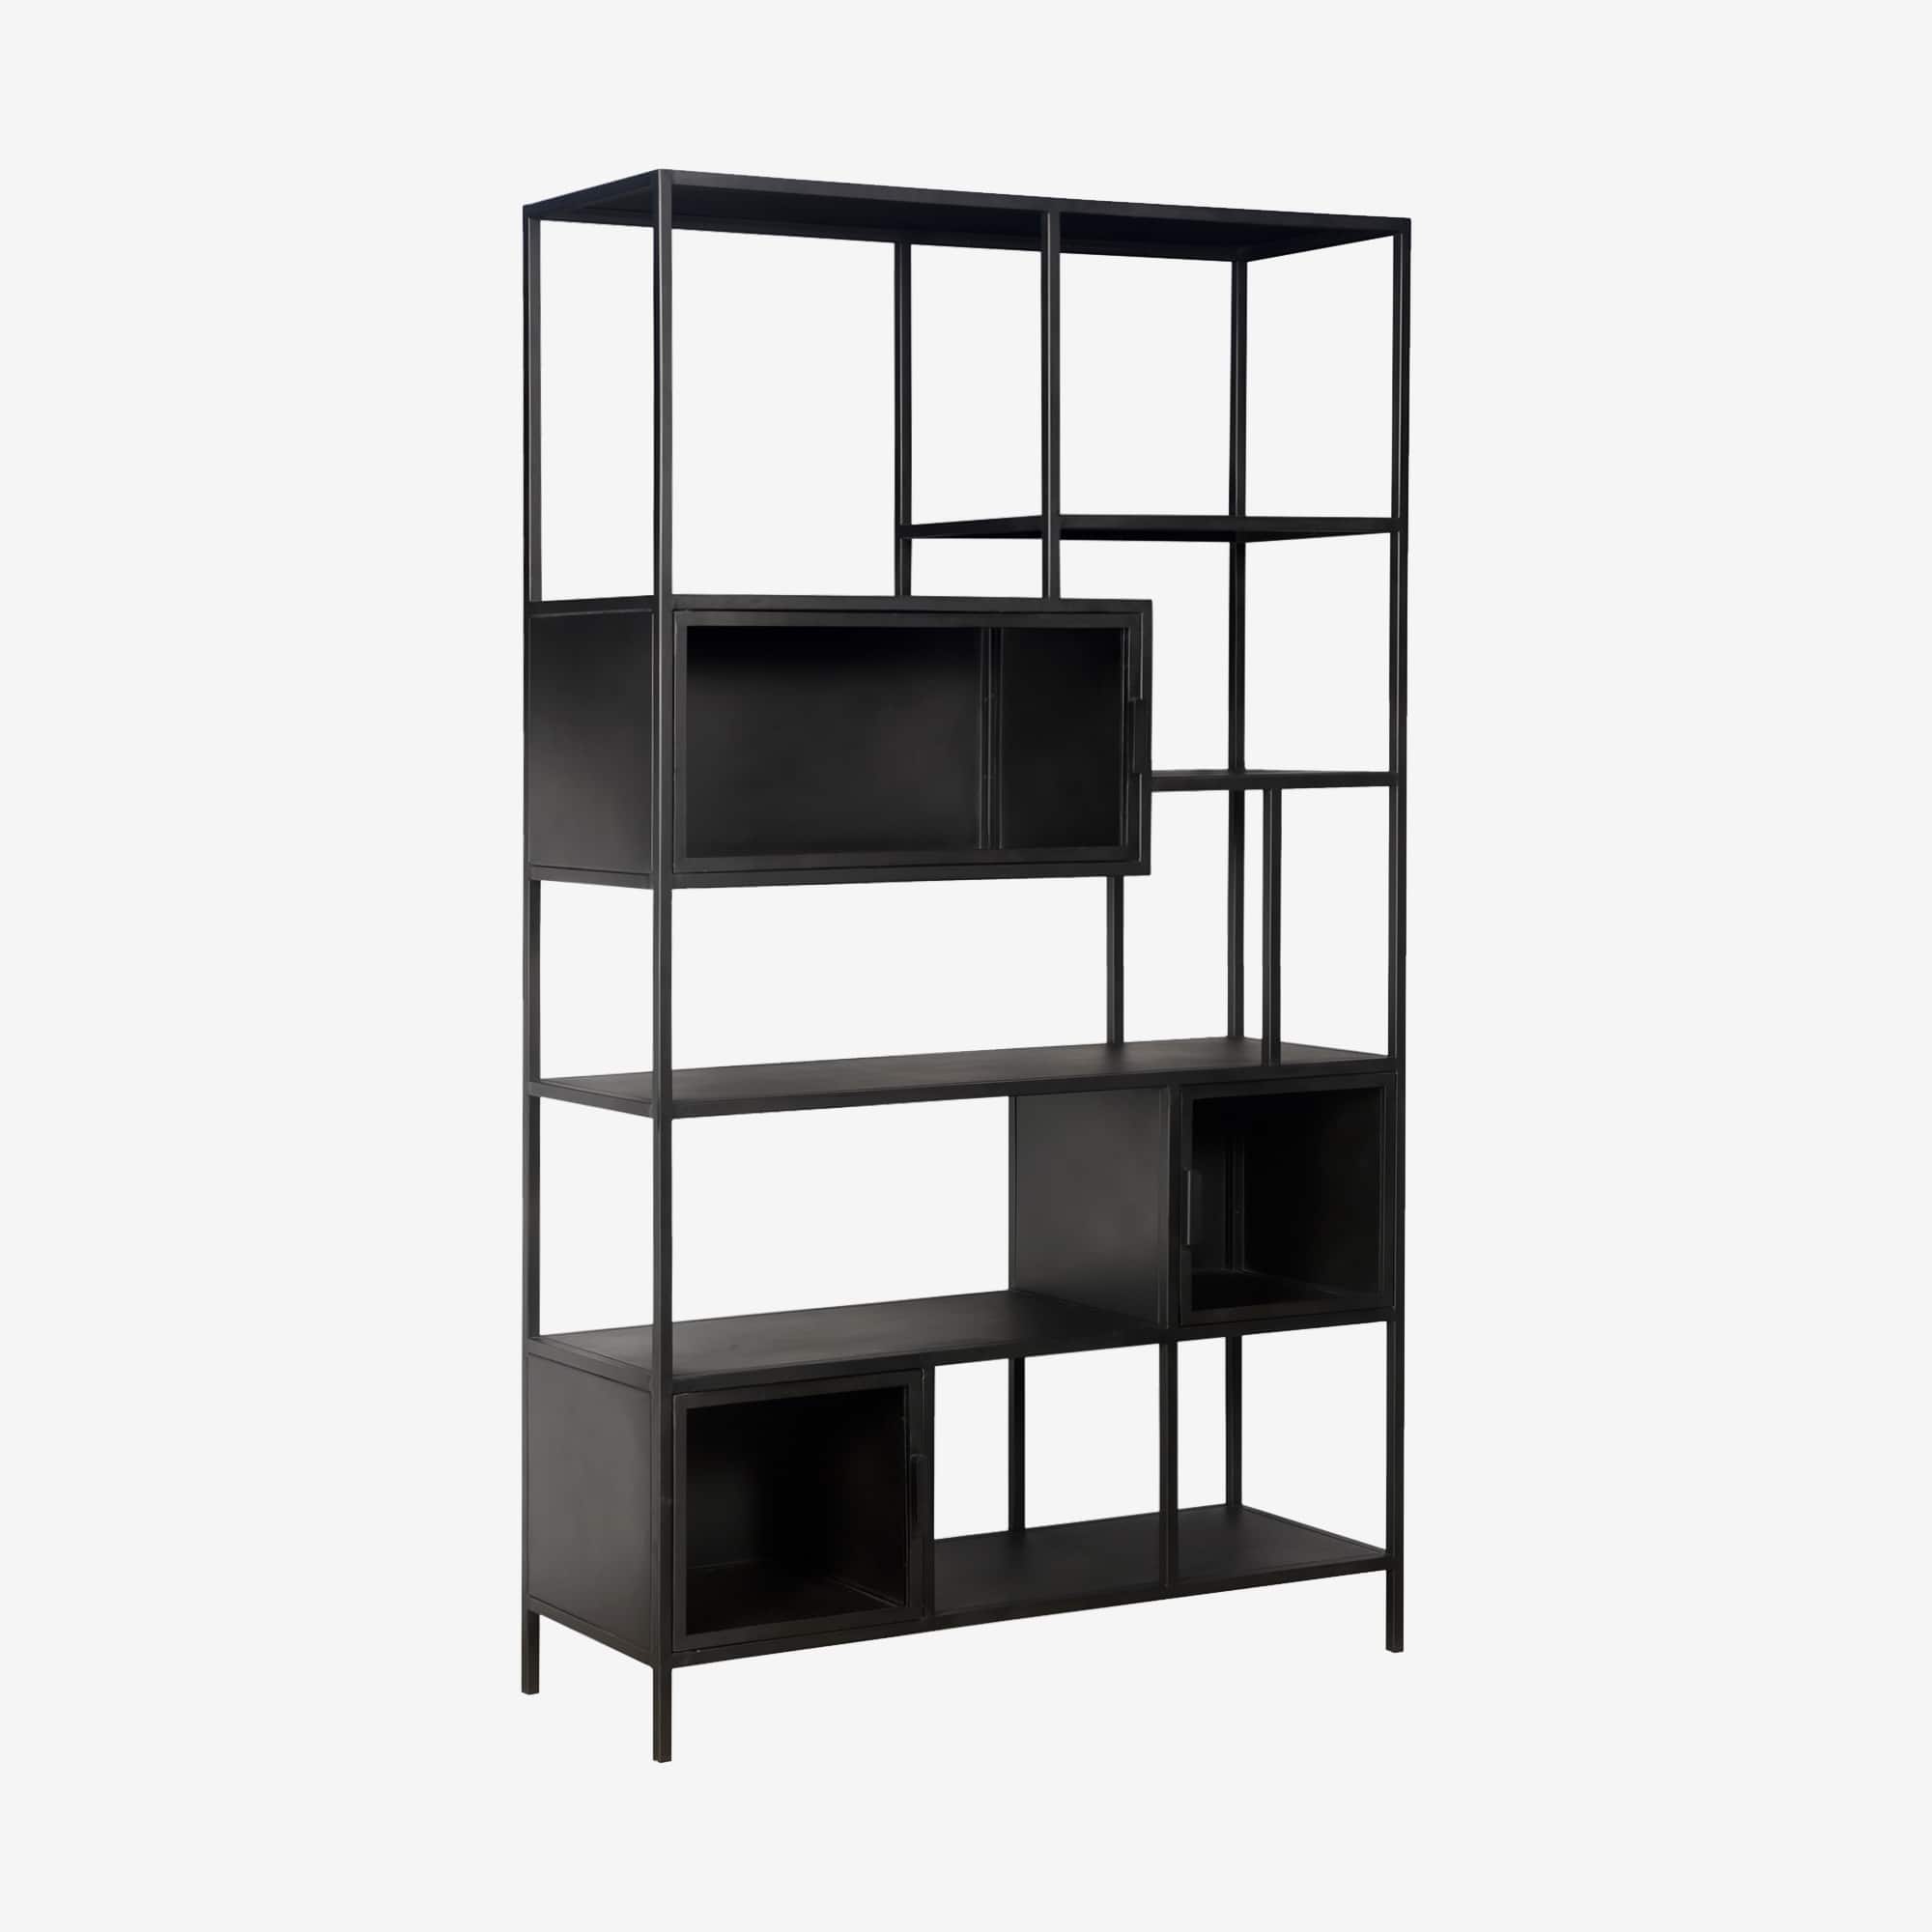 Wall cabinet vermont – black